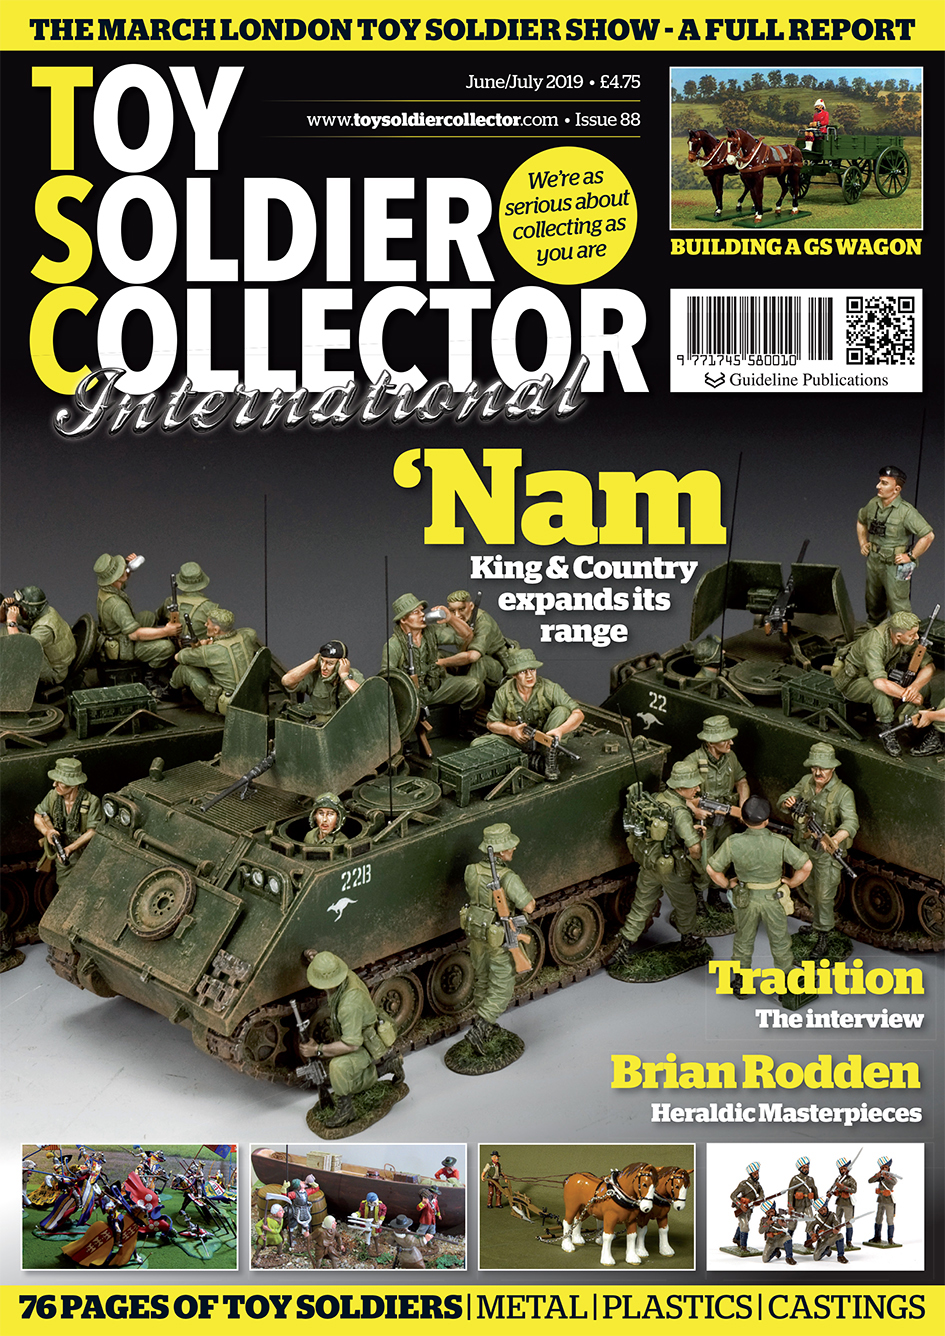 Guideline Publications Toy Soldier Collector #88 June/July  #88 